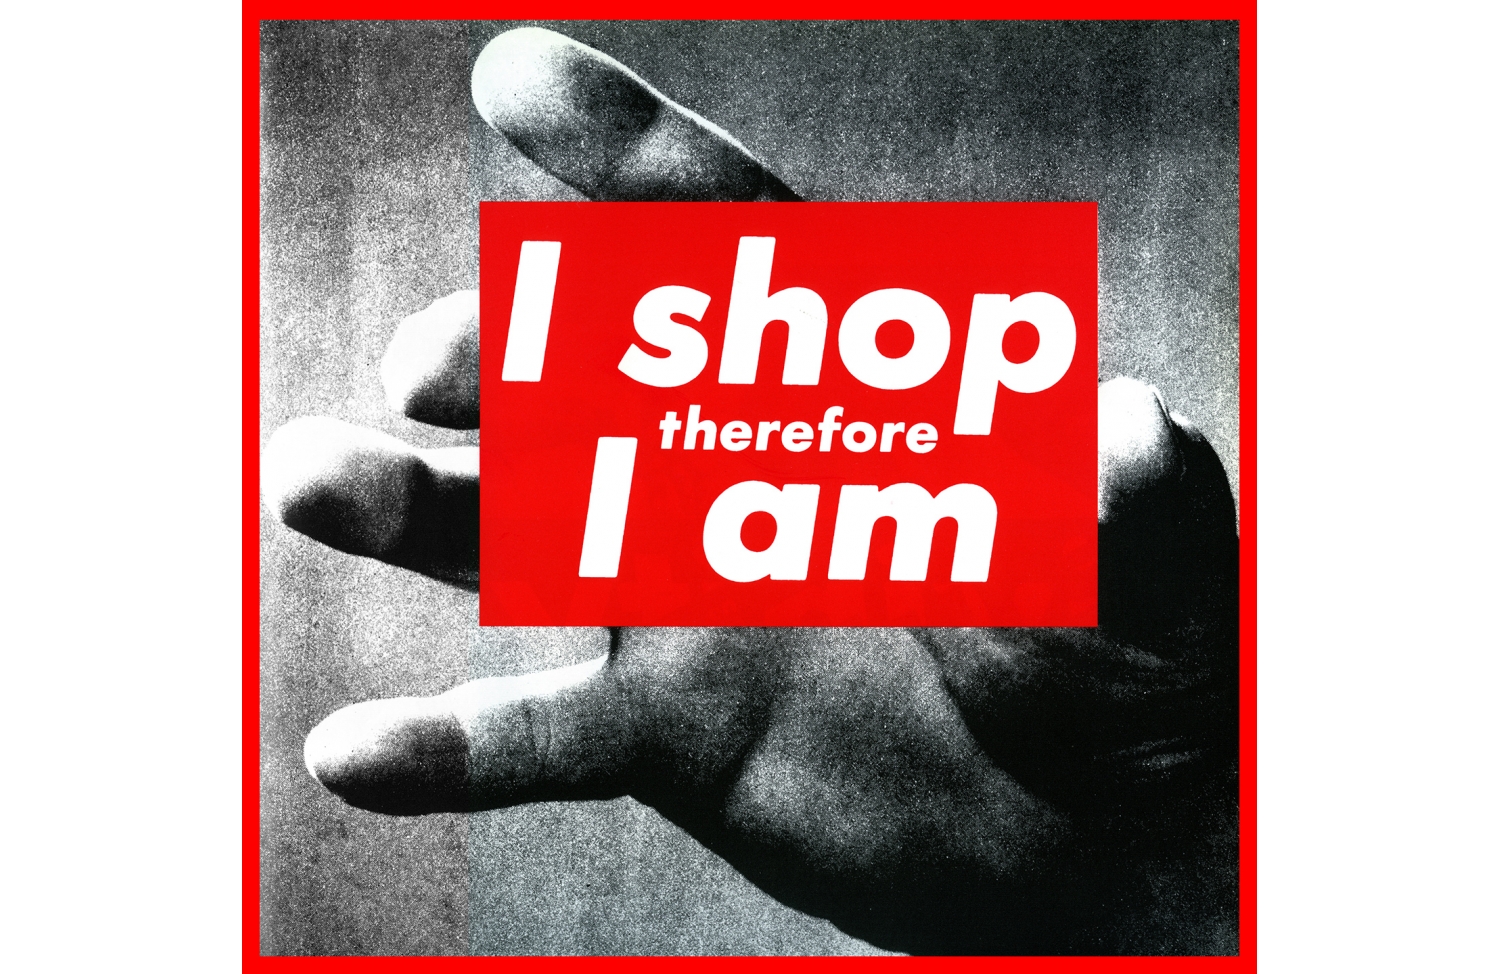 Barbara Kruger's Art - Blue is in Fashion this Year